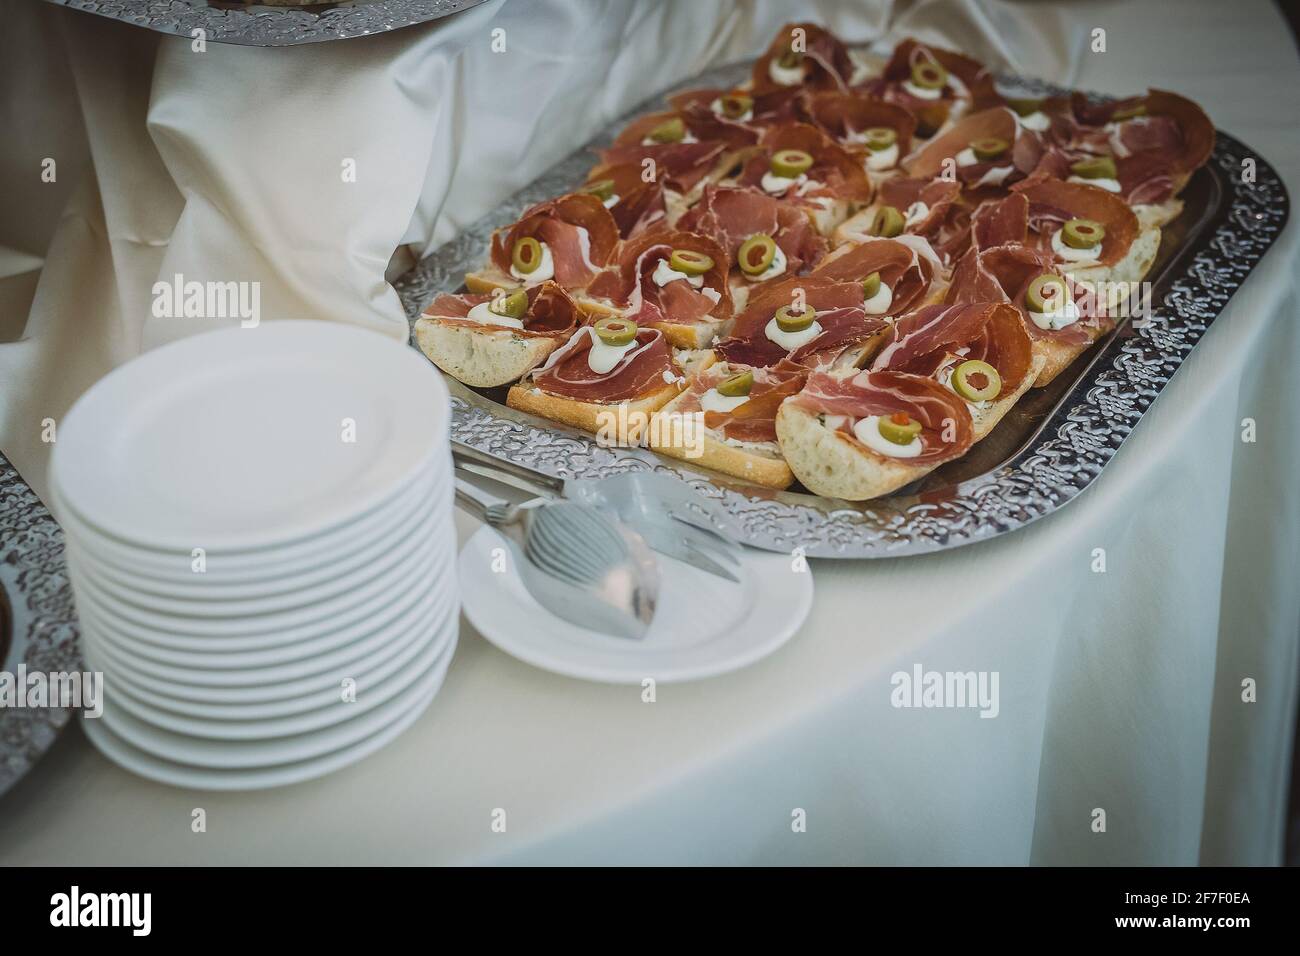 A collection of different snacks and sandwiches on a display on a silver plate at a gala event or a party. Hand is seen taking a prosciutto sandwich Stock Photo